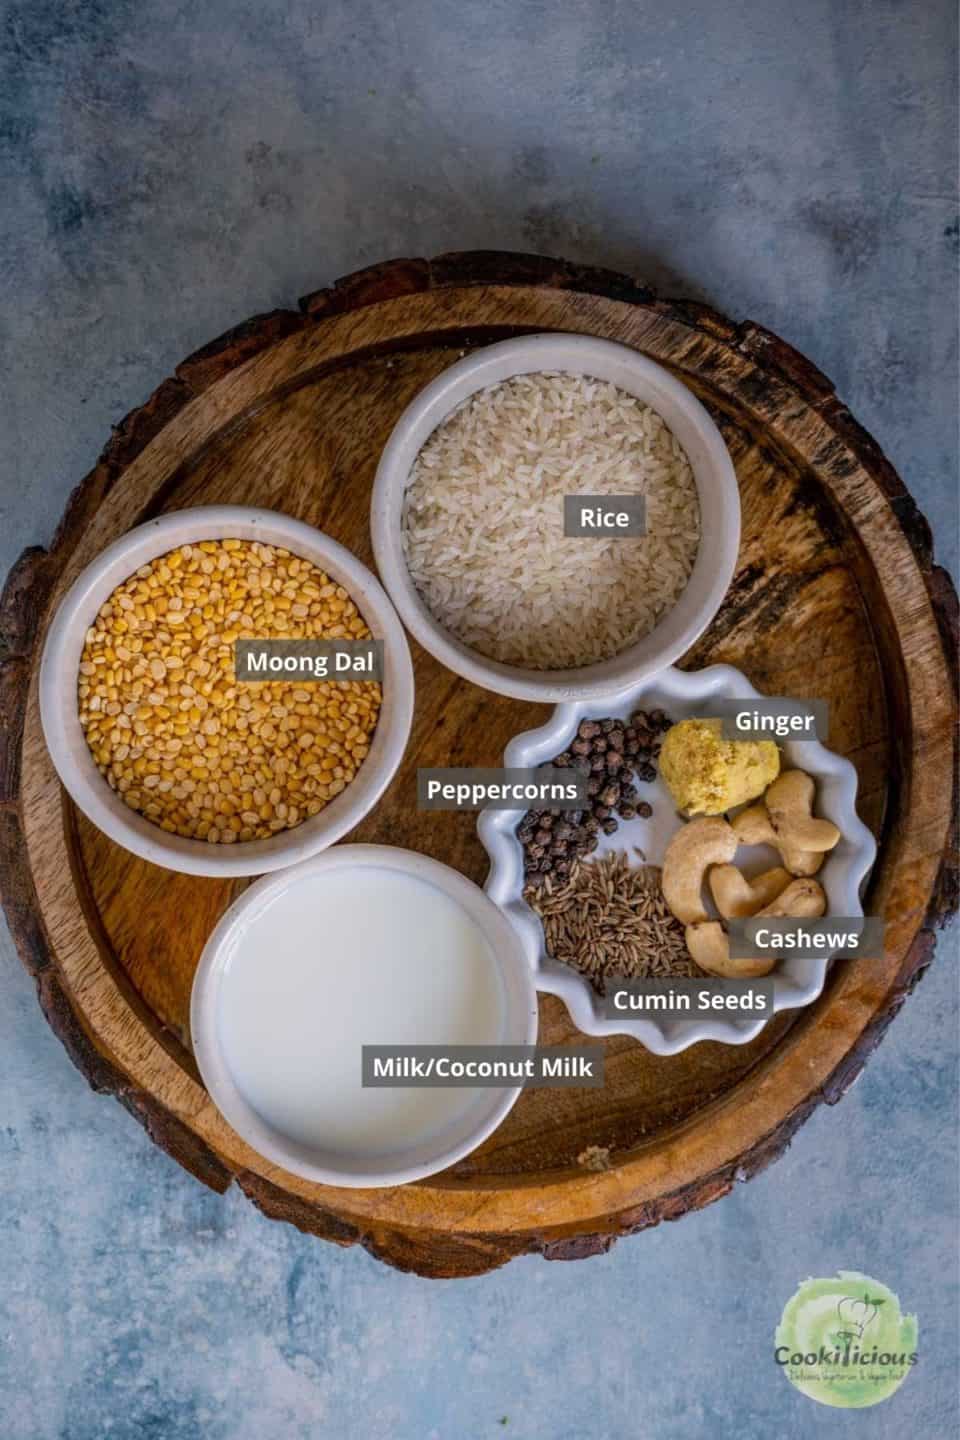 All the ingredients needed to make Instant Pot Ven Pongal placed on a wooden tray with labels on them